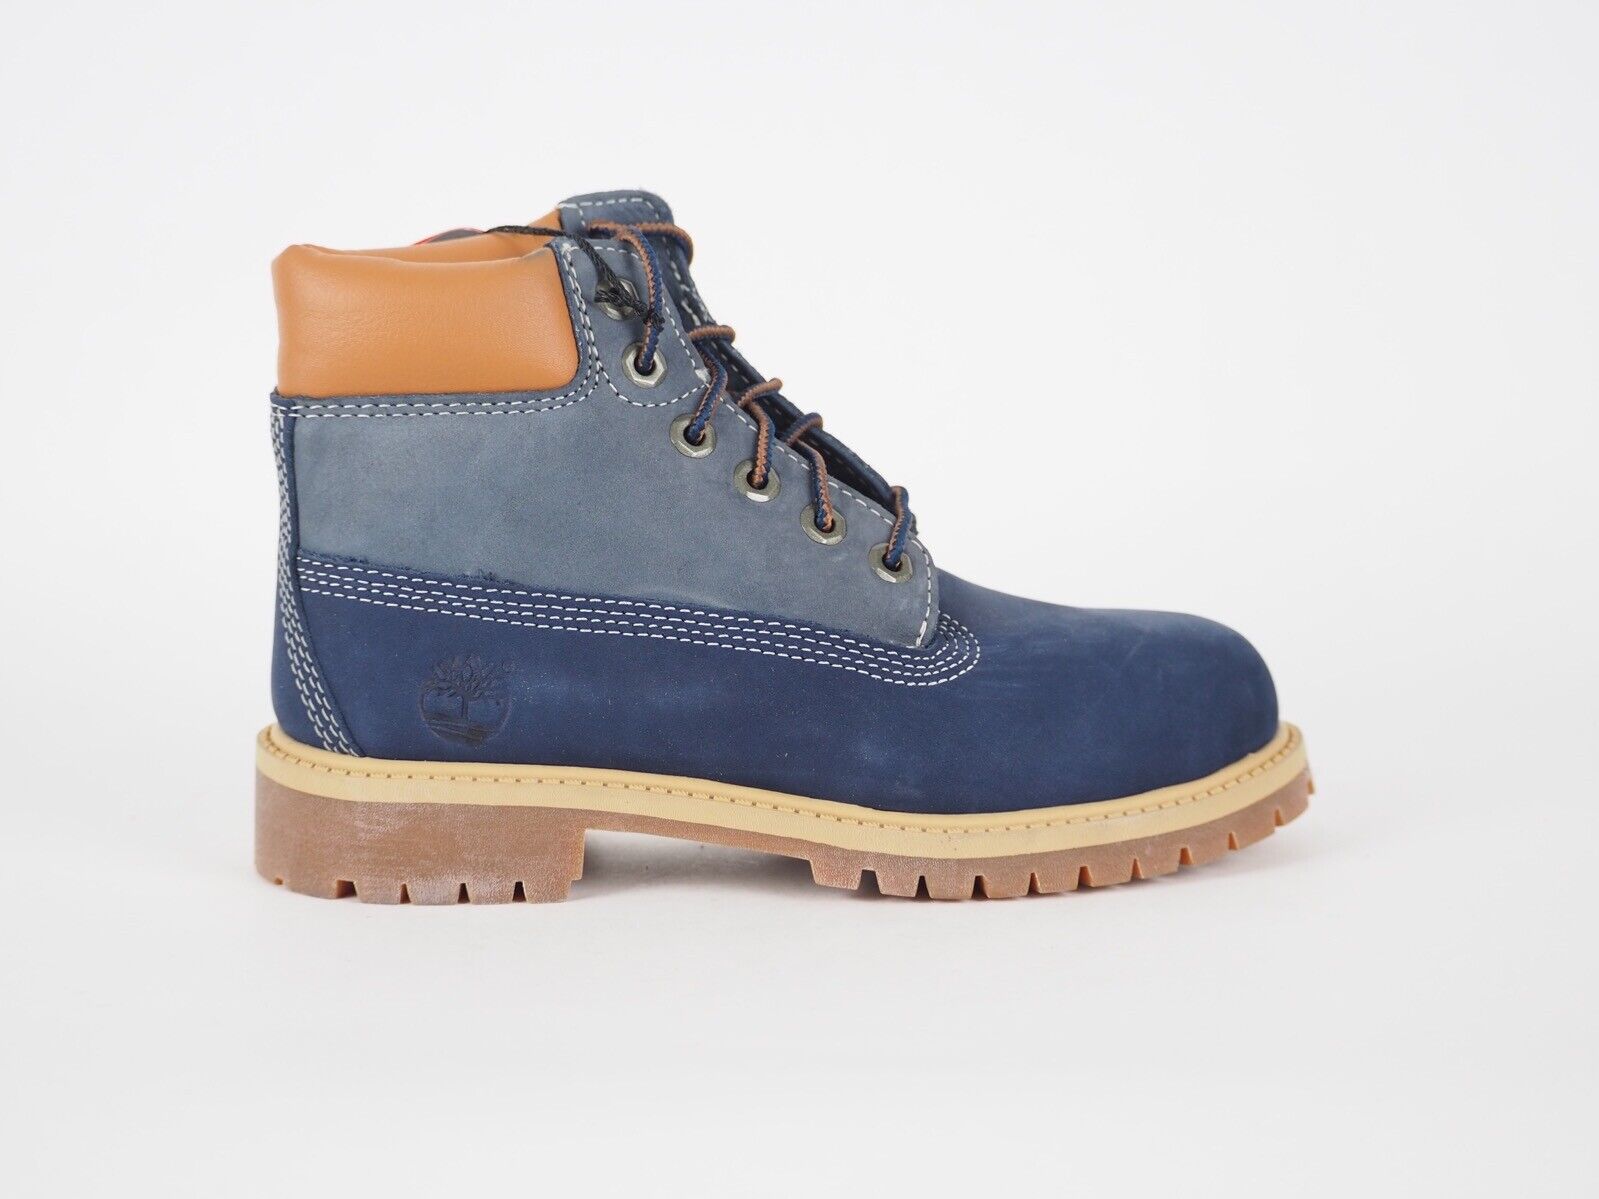 Boys Timberland 6 In Premium A119B Blue Leather Nubuck Casual Kids Chukka Boots